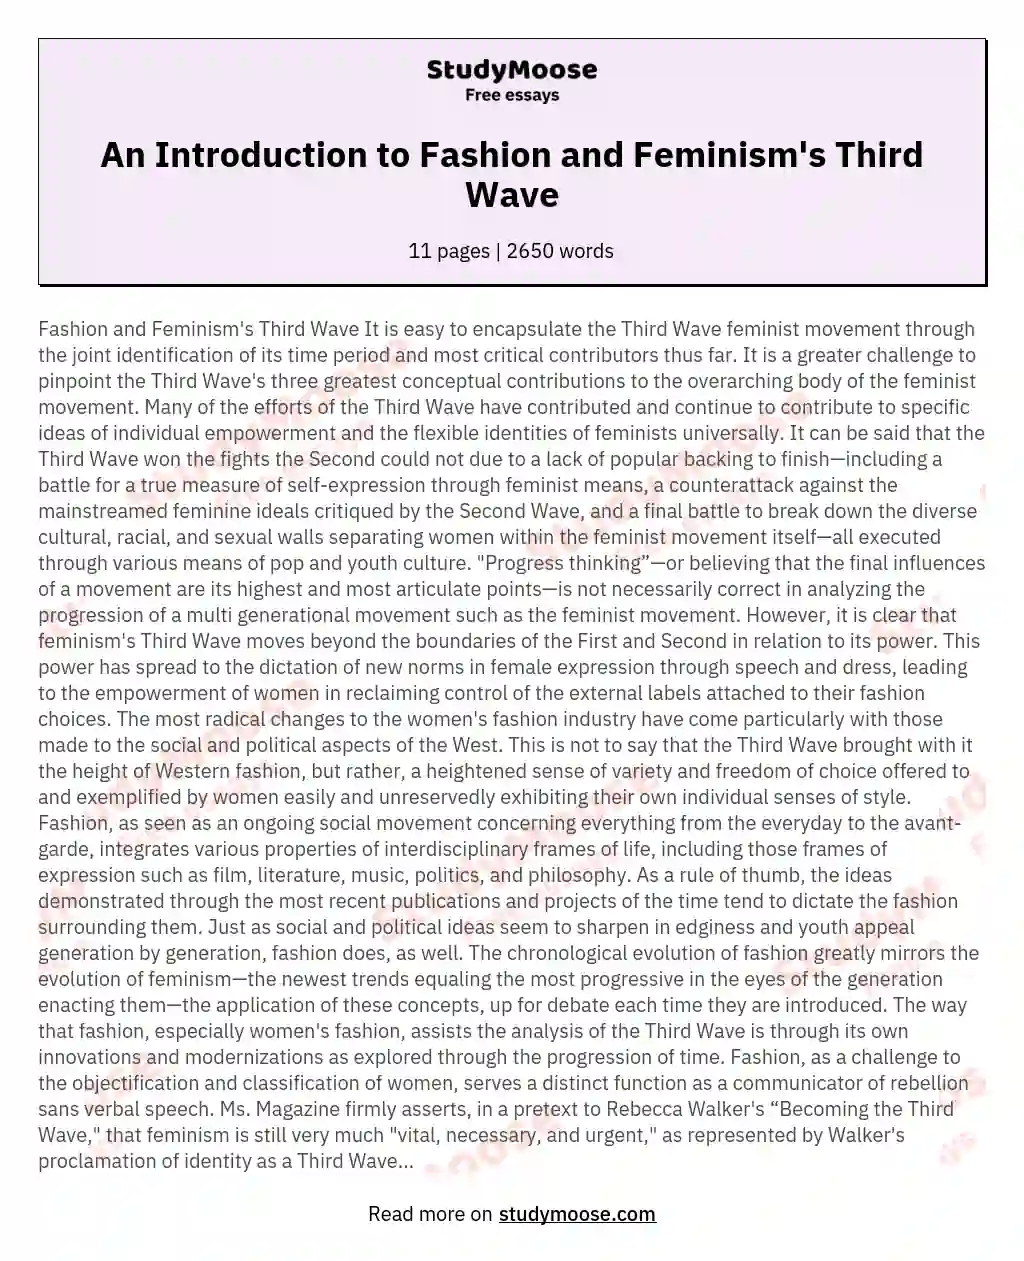 An Introduction to Fashion and Feminism's Third Wave